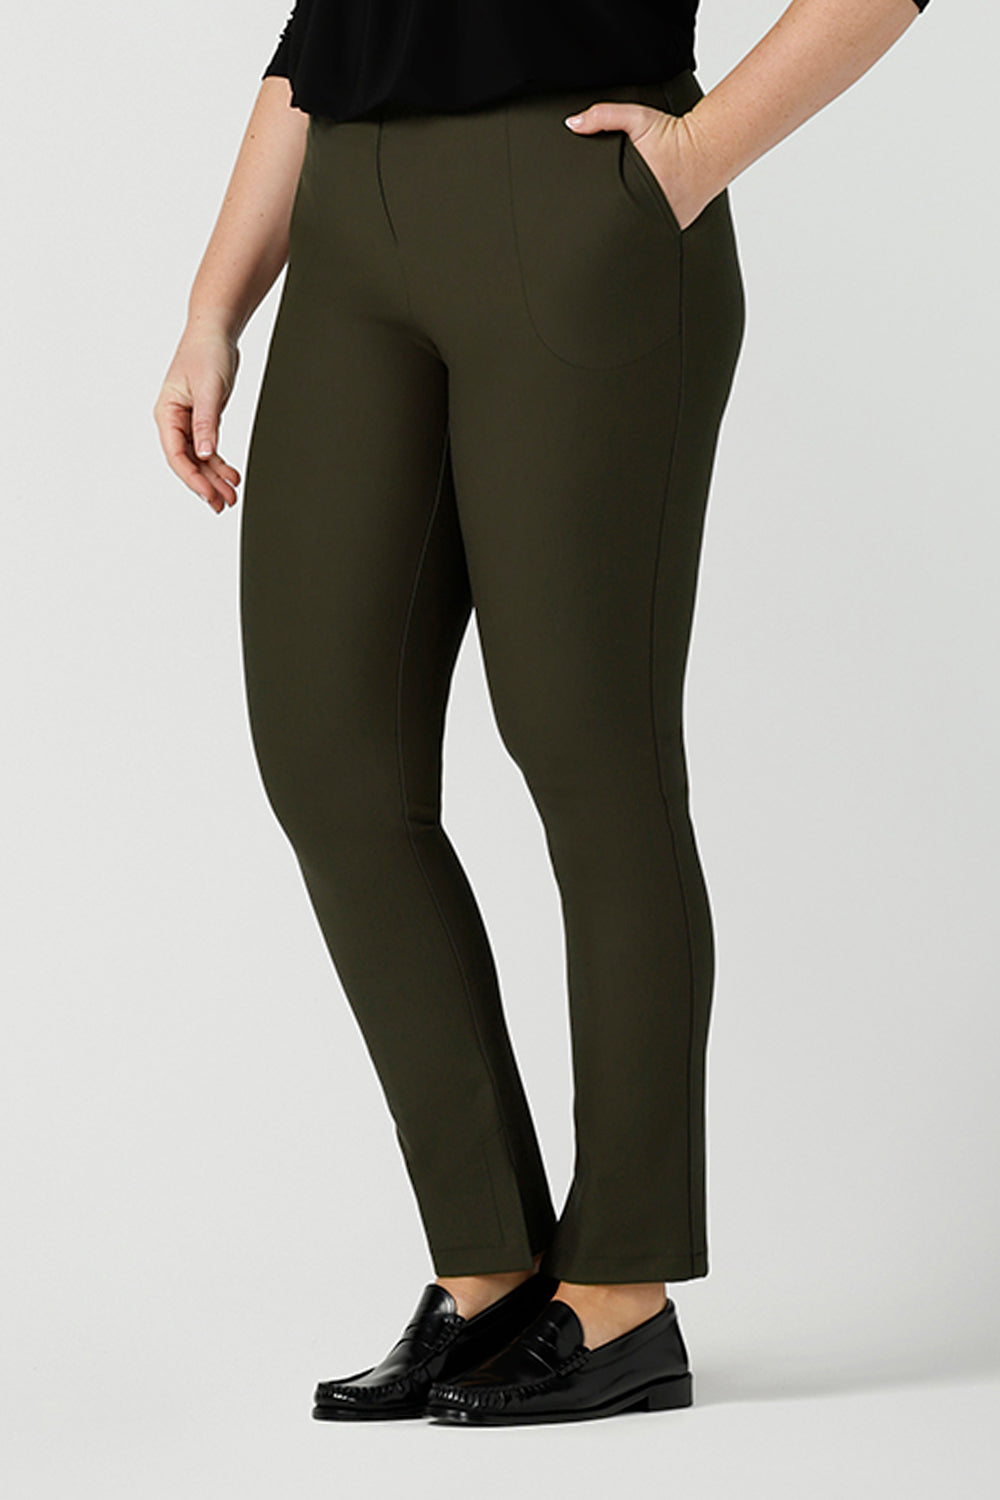 Smart-casual, professional pants for women, these olive green slim leg pants are shown on a size 12, curvy woman. Made in Australia by online ladies clothing brand, Leina & Fleur shop these comfortable trousers in petite to plus sizes.